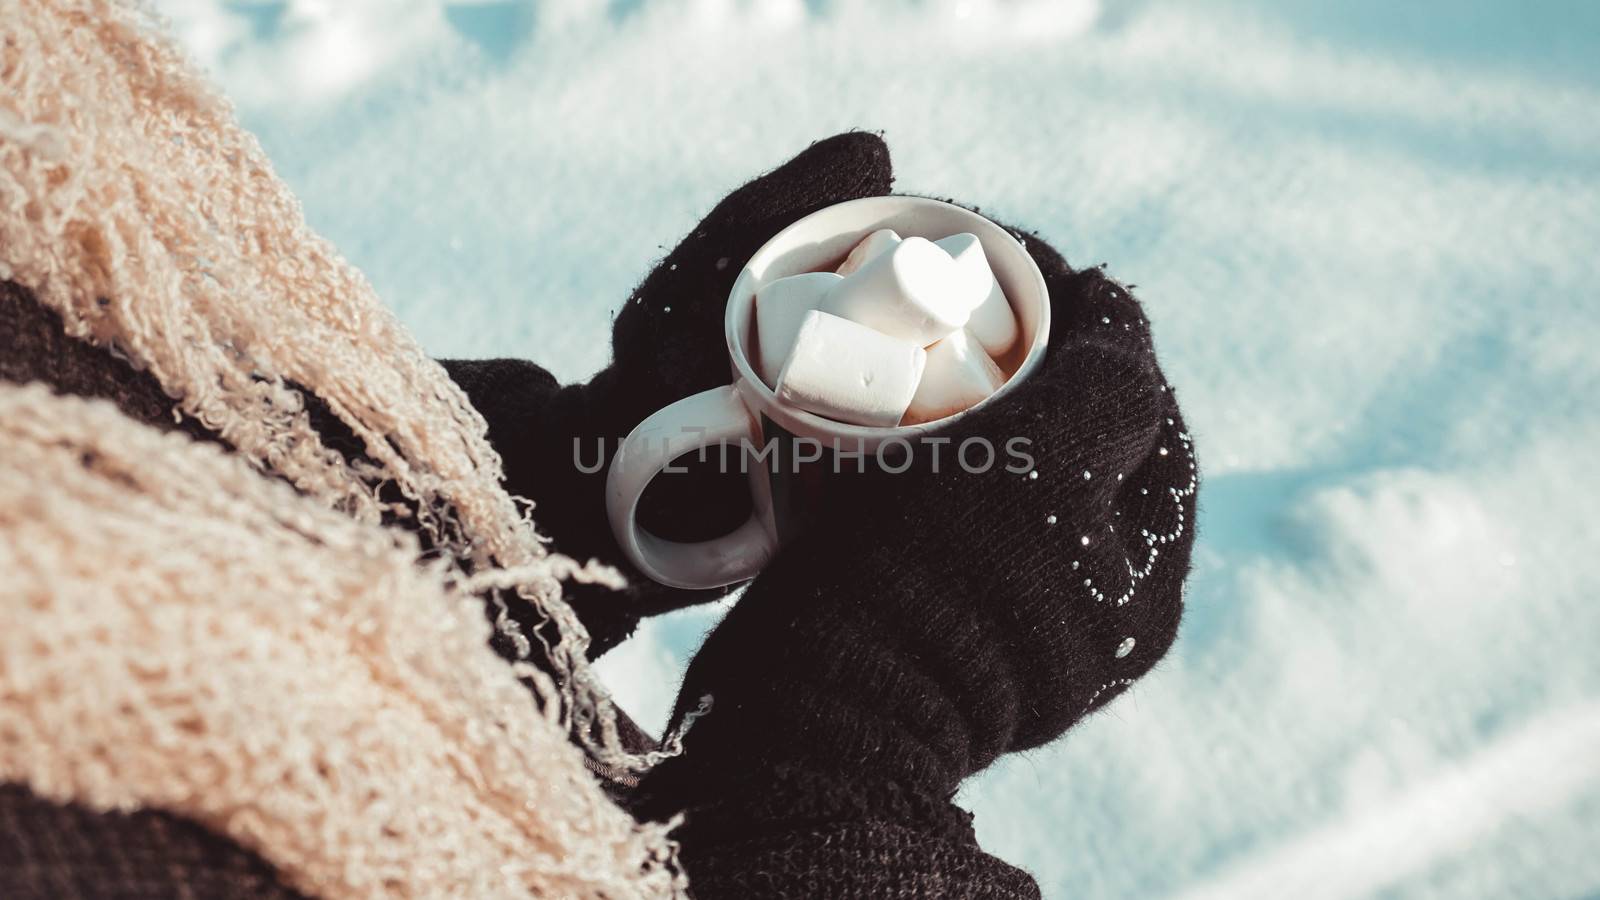 A cup of cocoa with marshmallows in hands in mittens. Warm winter background by natali_brill